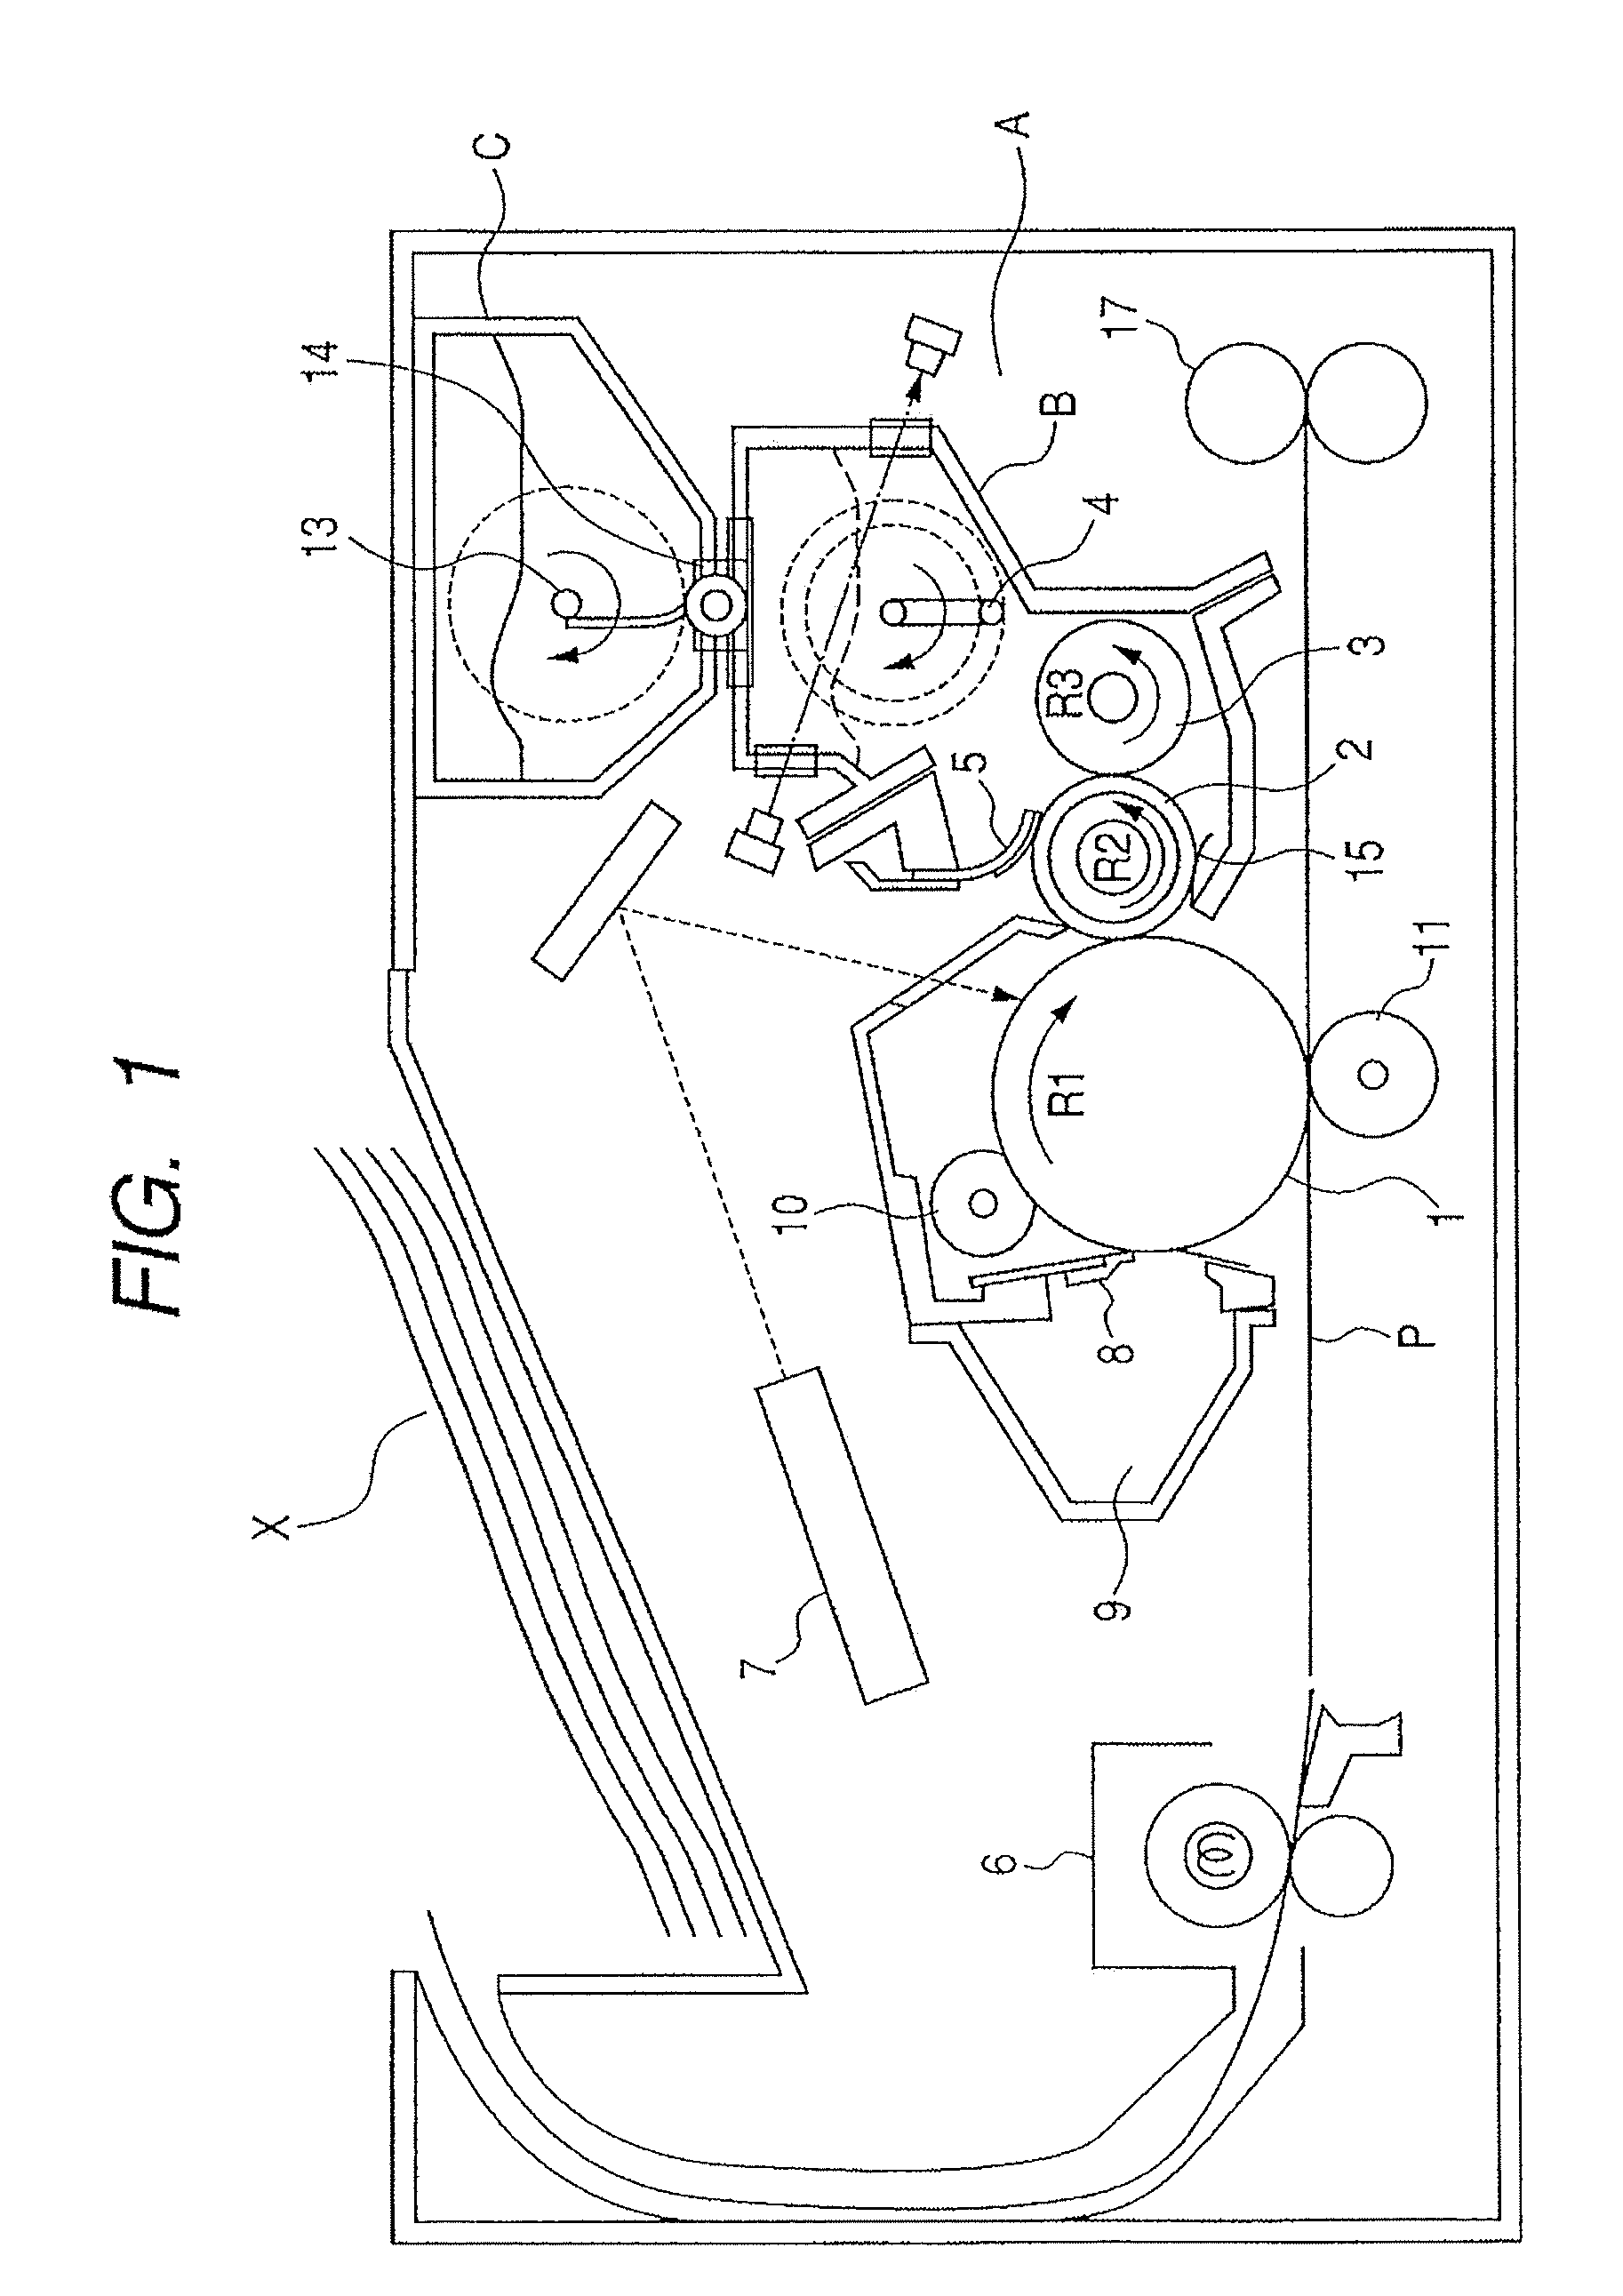 Image forming apparatus with a developer regulating member